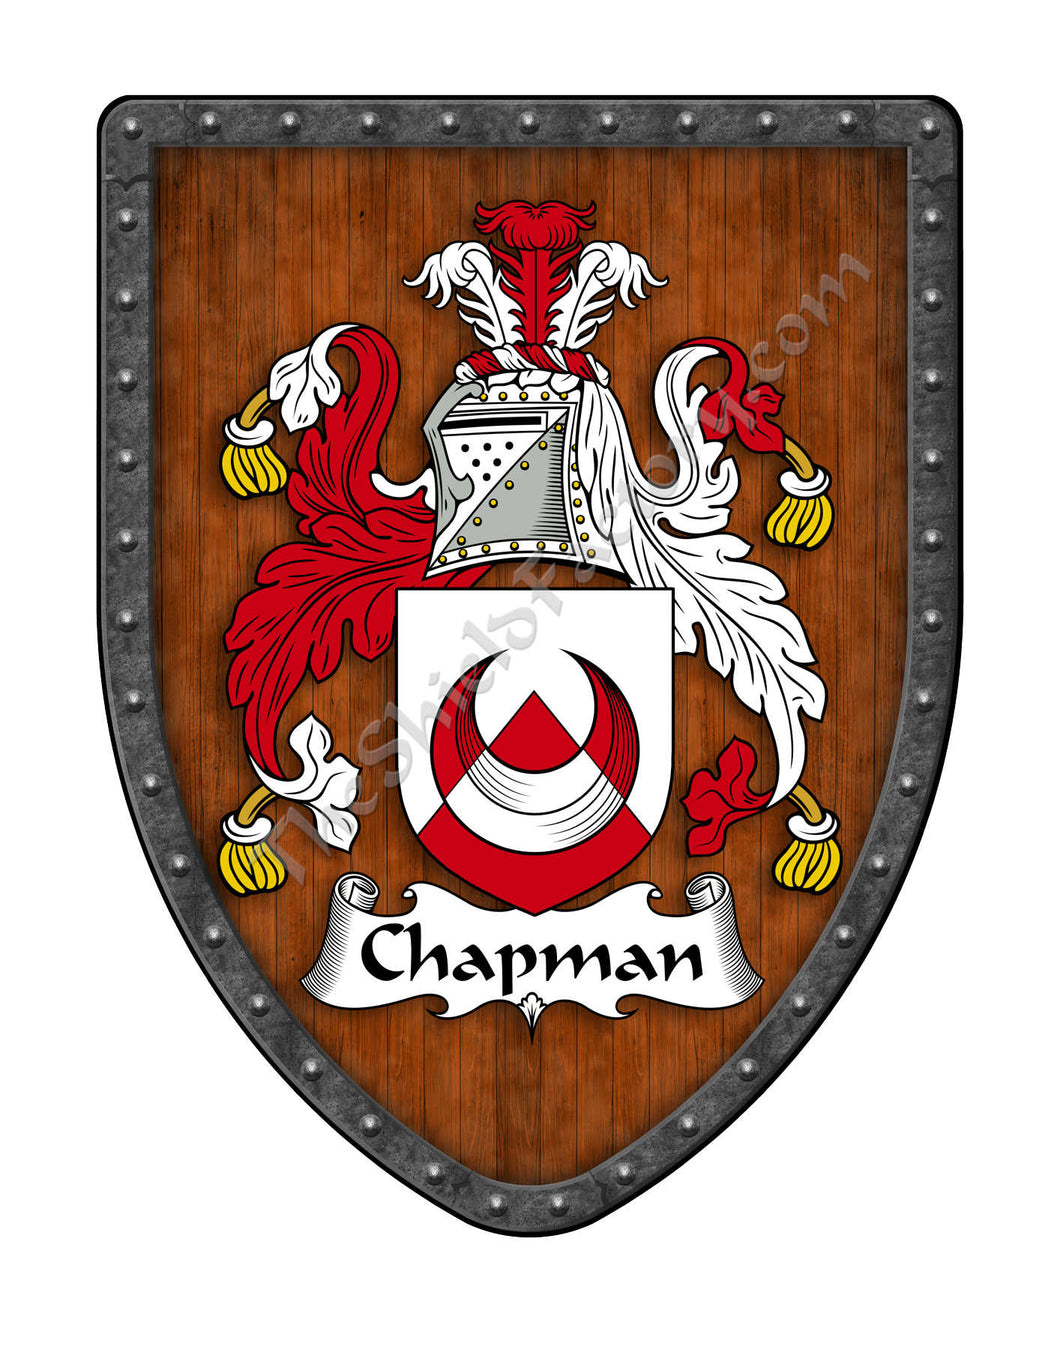 Chapman Coat of Arms Shield Family Crest